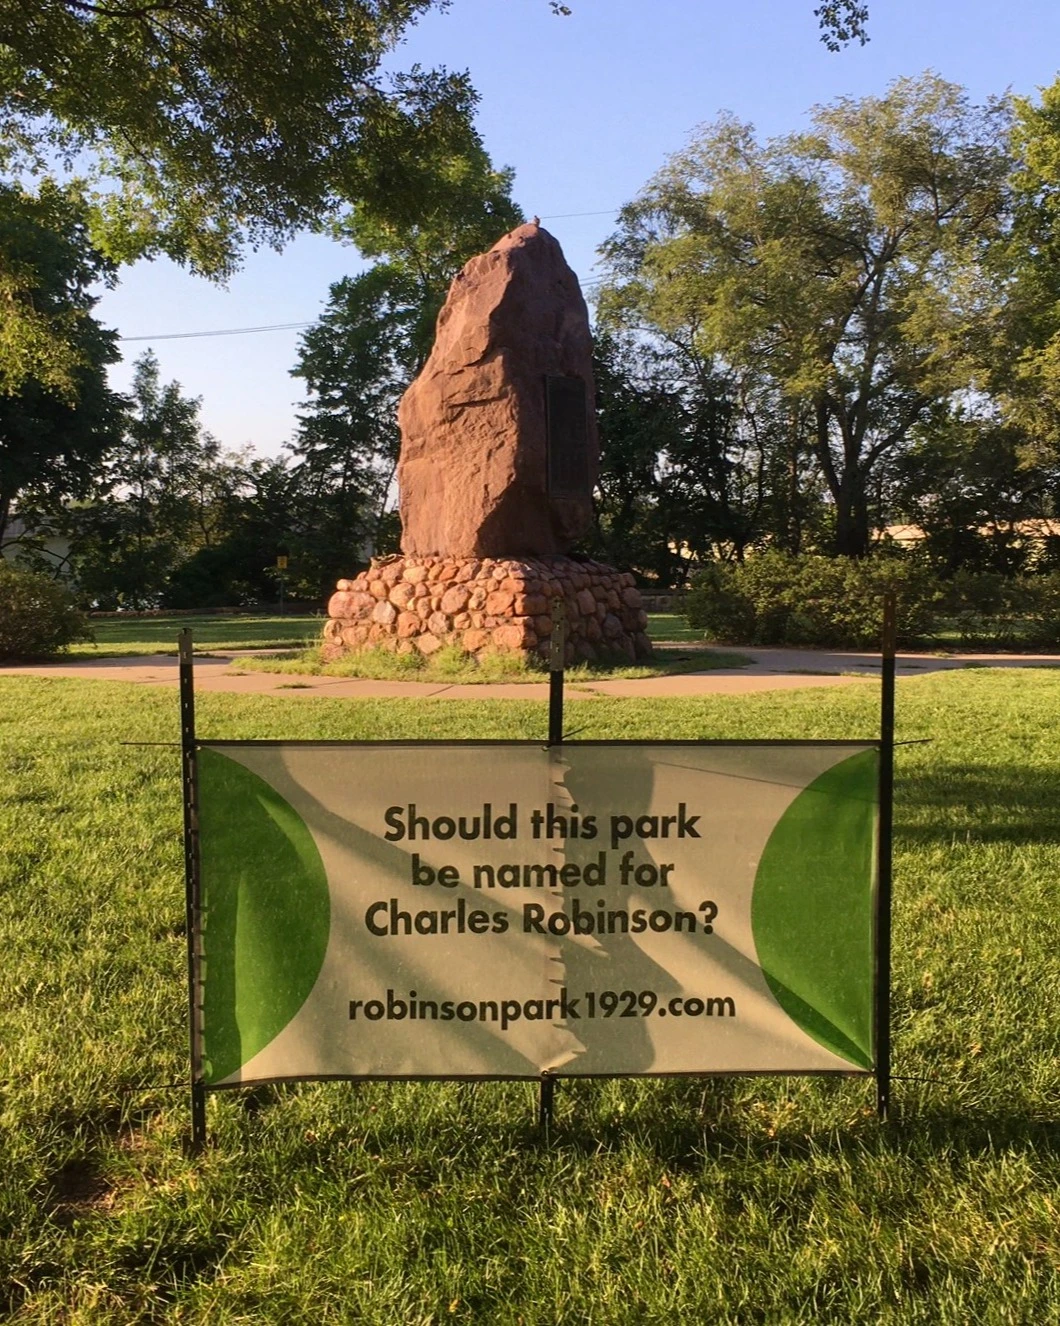 In a clearing, a tall red boulder sits on a pedestal. The boulder is almost as tall as the trees around it. Posted in the ground in front of the boulder, a sign reads "Should this park be named for Charles Robinson? robinsonpark1929.com"